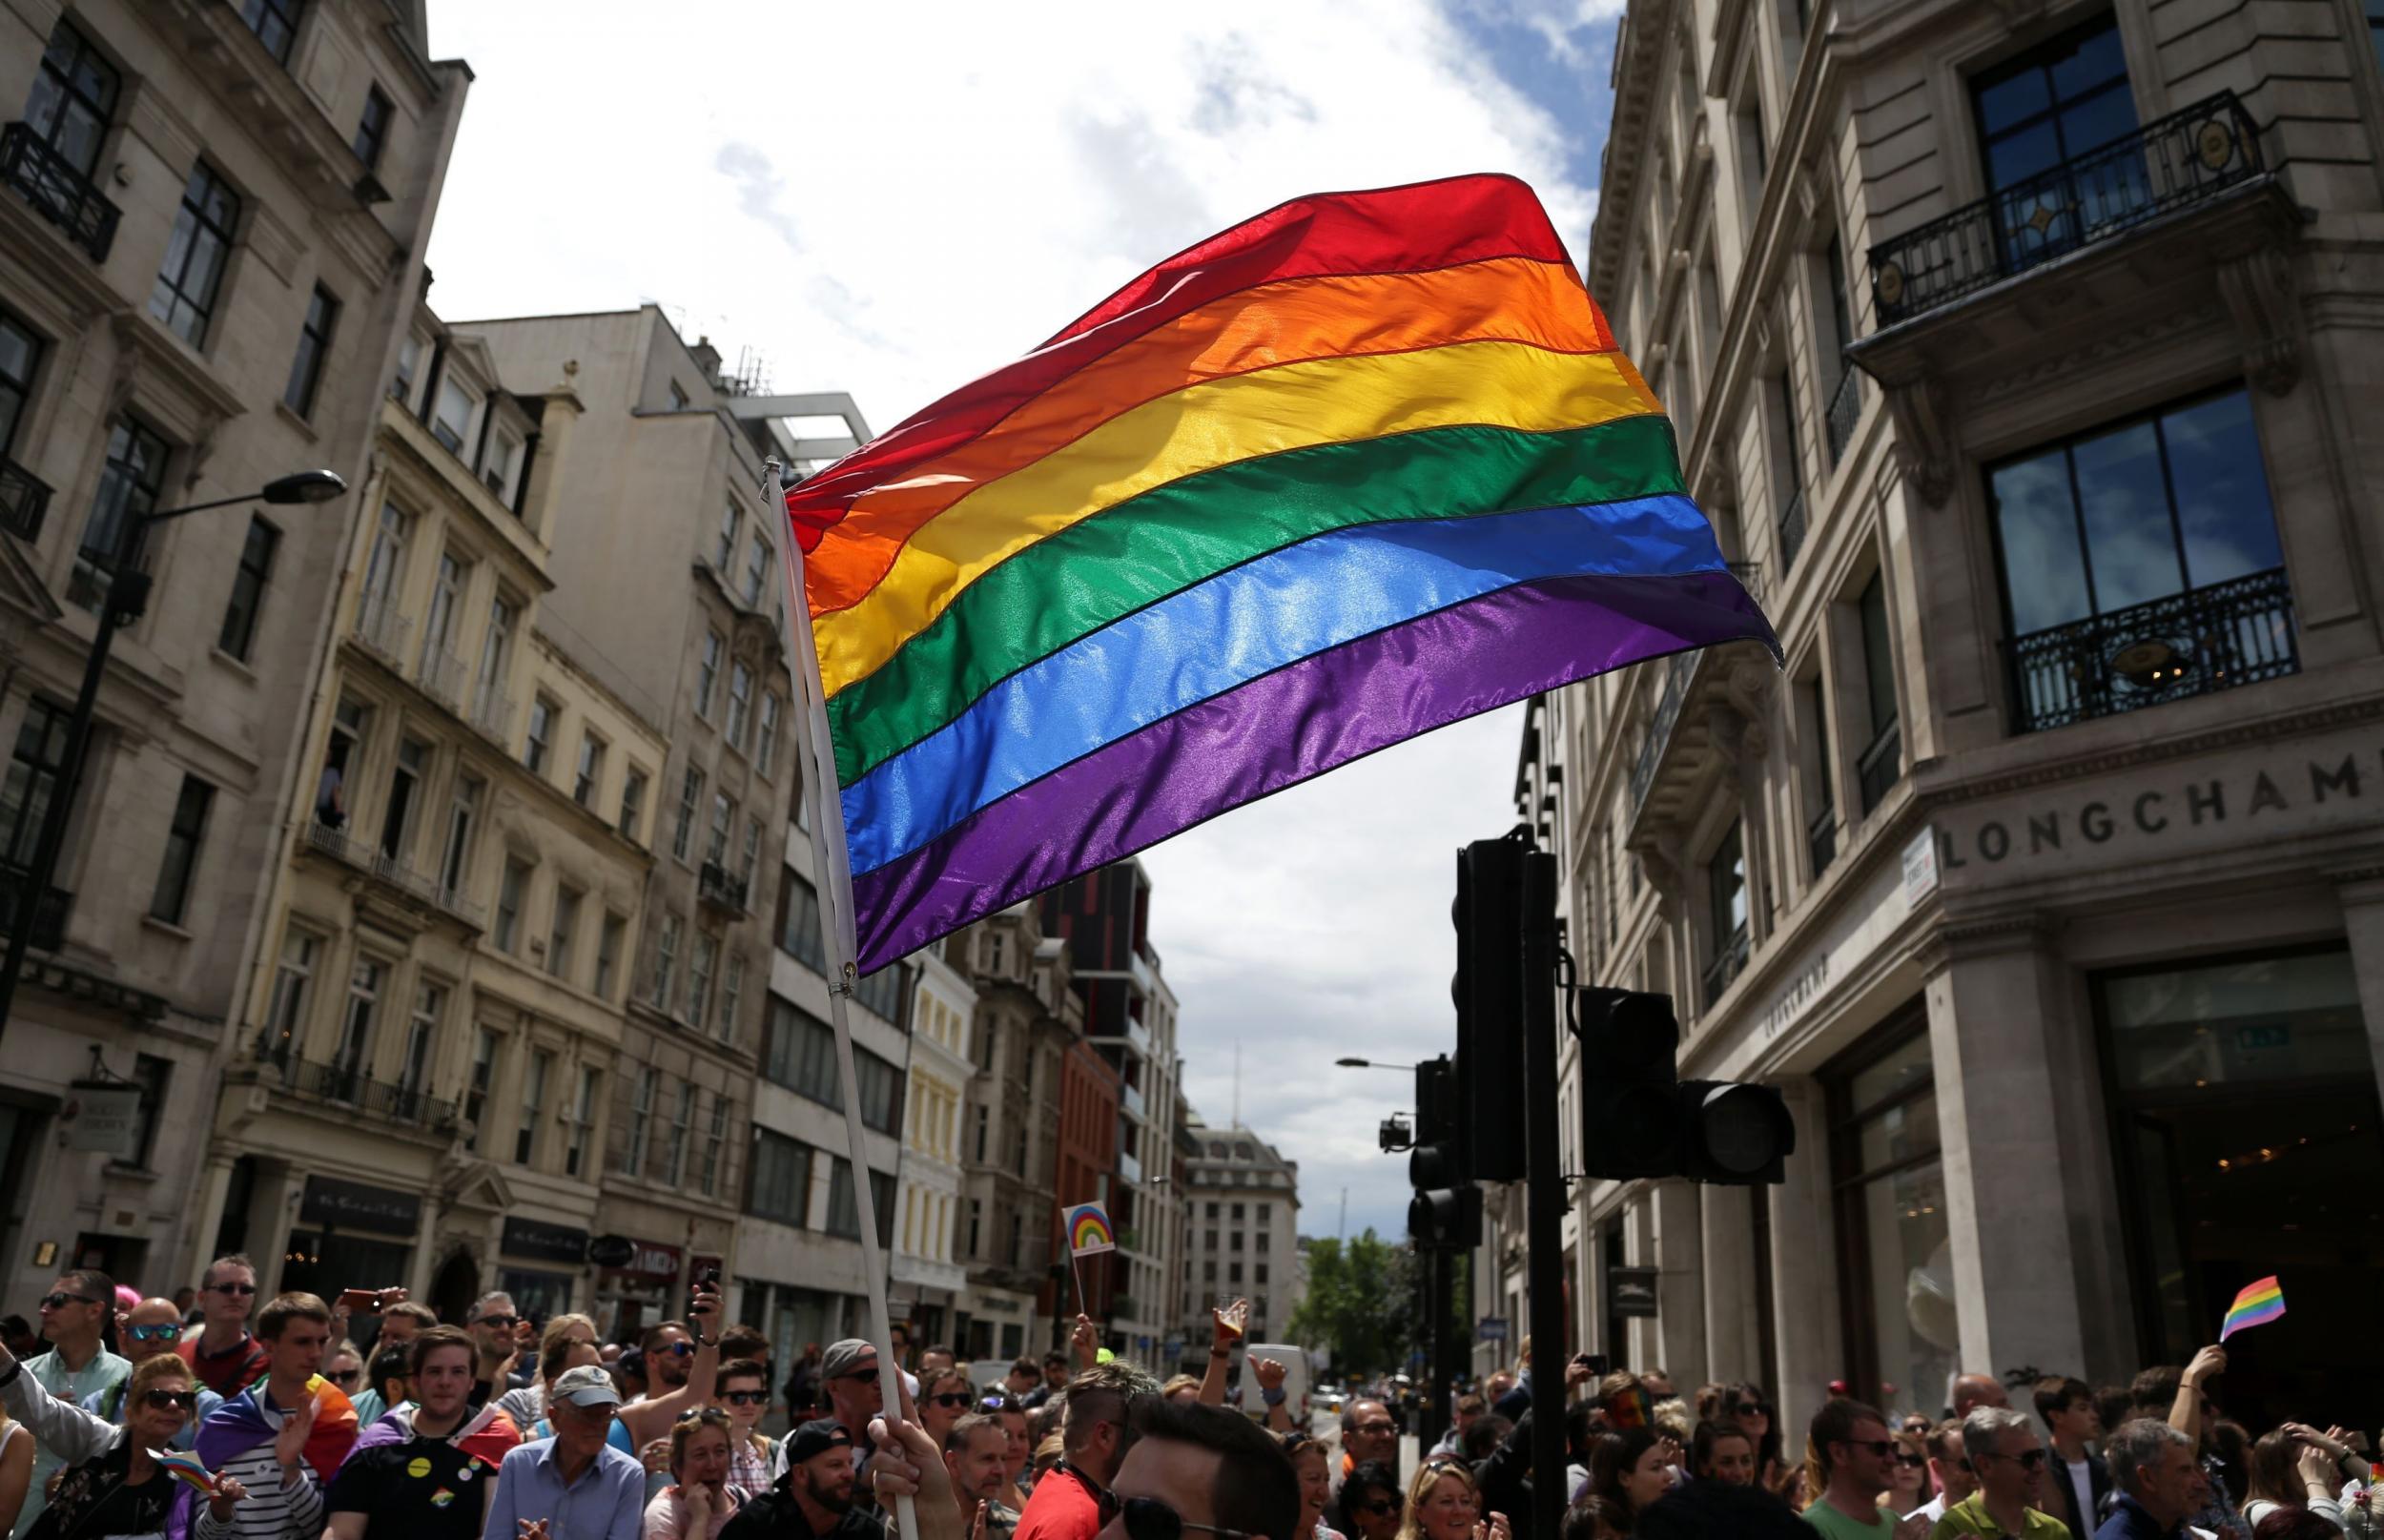 A rainbow flag is held aloft in London's Pride parade last month